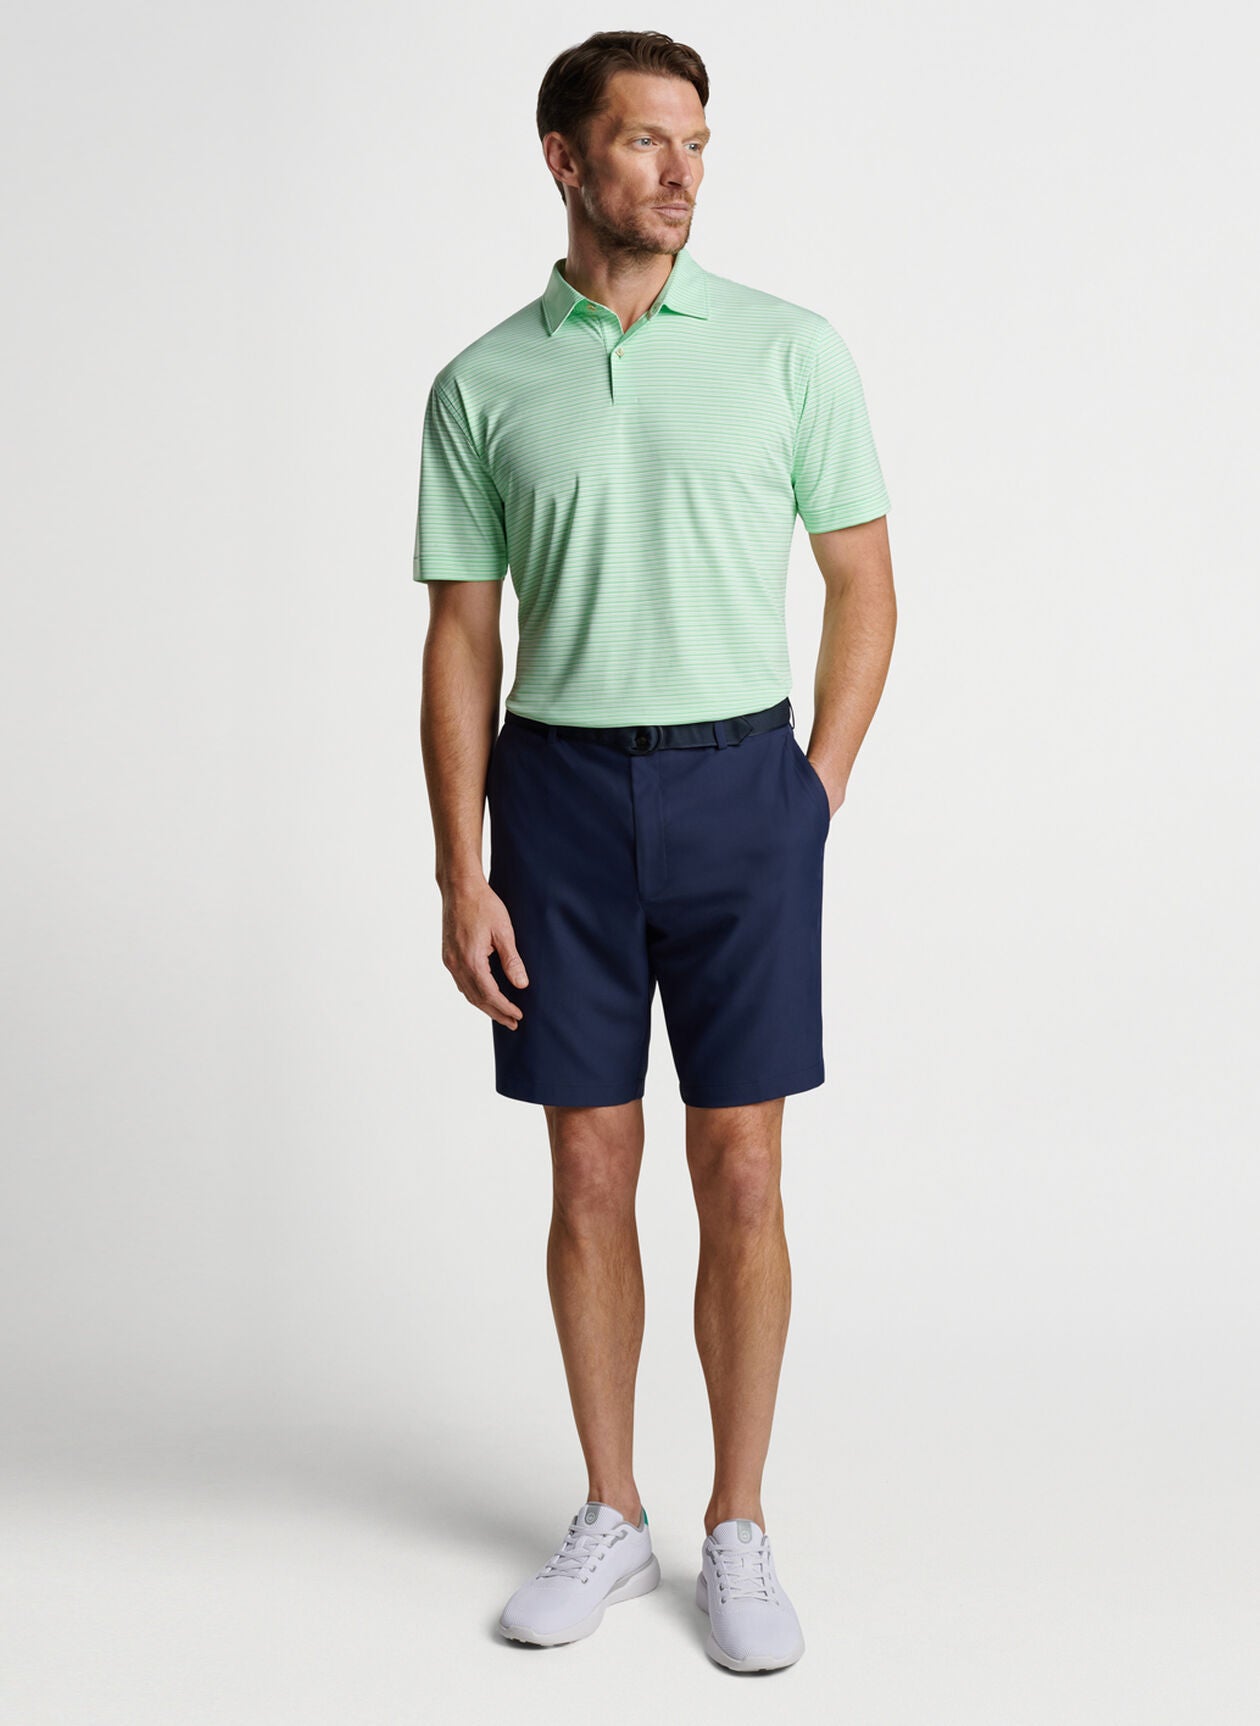 Featherweight Performance Payne Stripe Polo - Summer Meadow